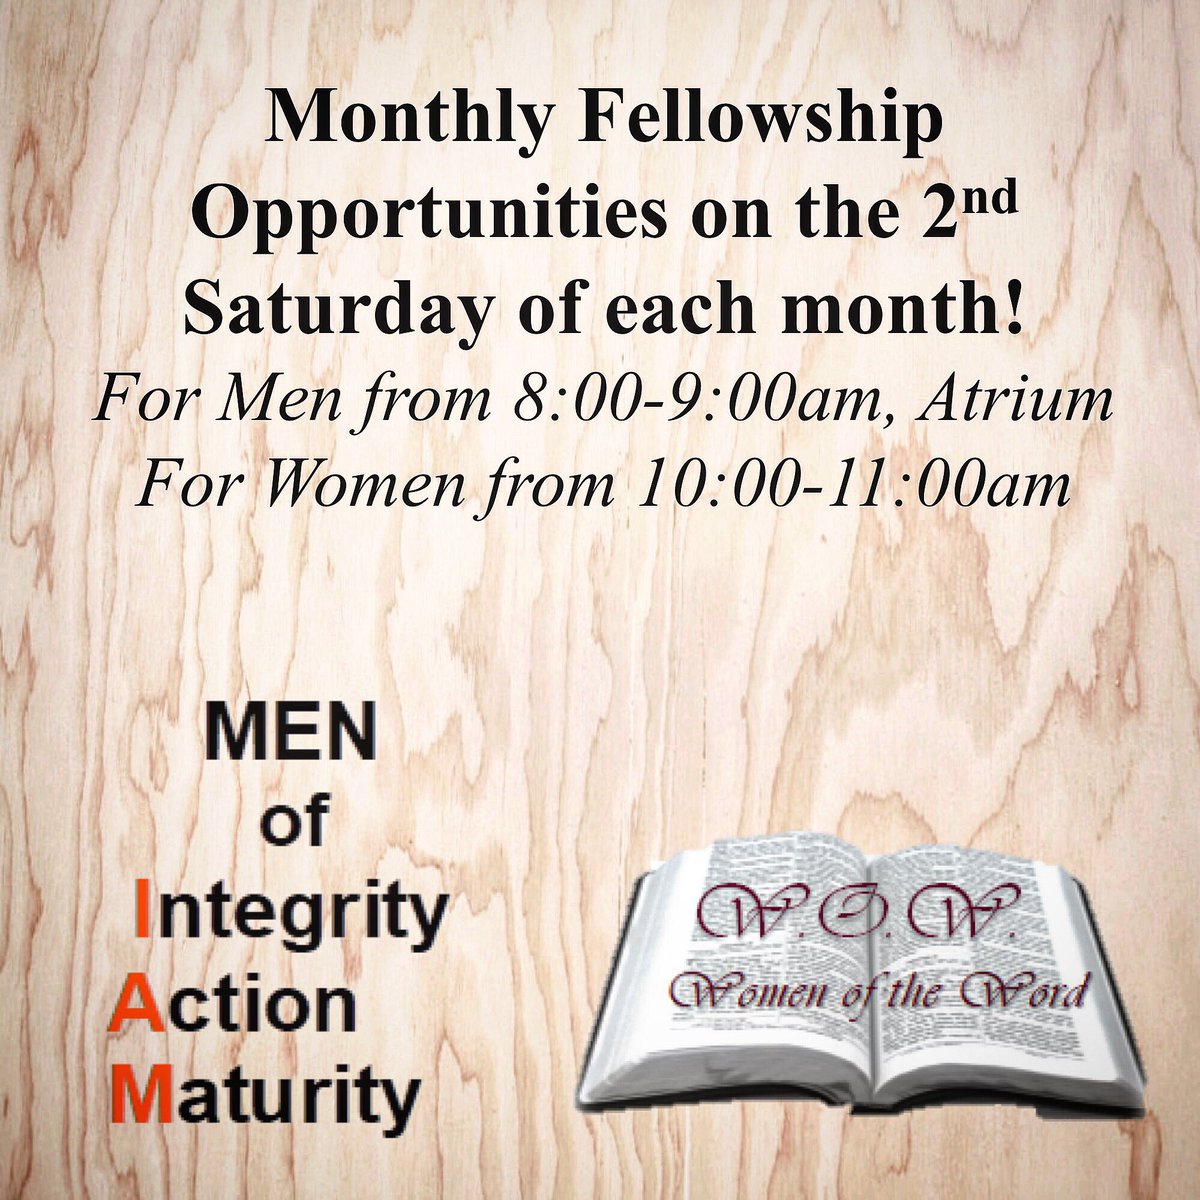 Greetings CPC don’t forget about our monthly fellowship group opportunities on the 2nd Saturday of each month for men and women. #cpcgoodyear #ecochurch #fellowshipgroups #goodyearaz #phoenixchurch